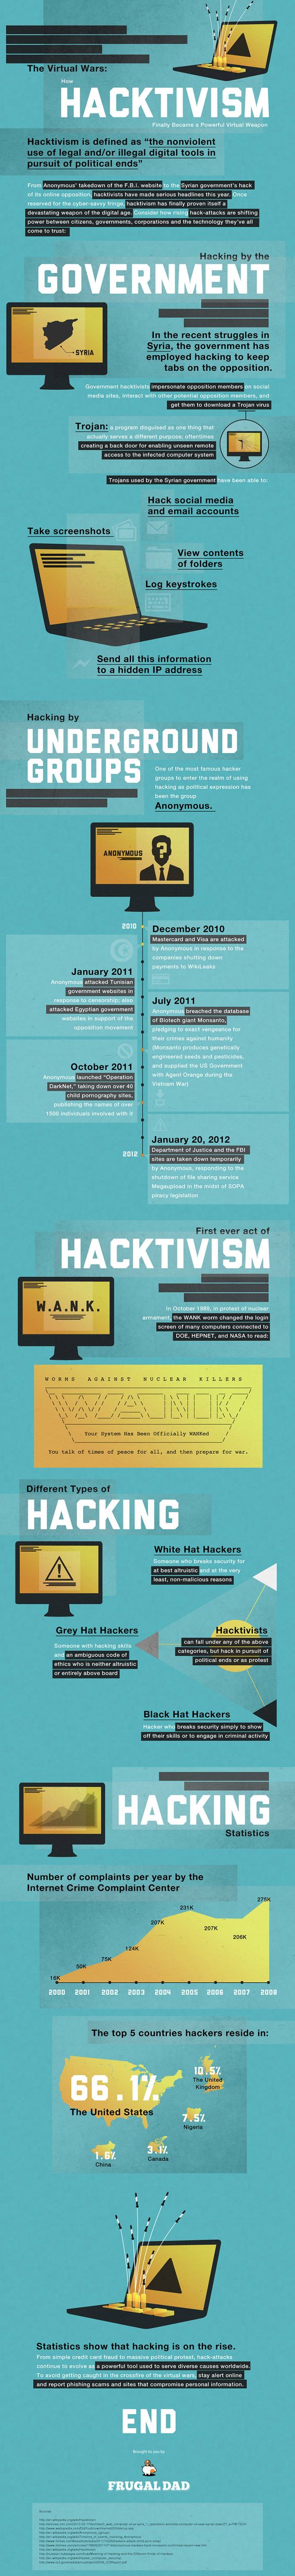 Hacktivism has hit its tipping point. The year 2011 had the most hacktivism-related crimes in history. The way hacktivists define themselves is important — they don’t want to be associated with cyber criminals who hack websites for financial gain. Hacktivists set out to make political statements by attacking targeted websites and breaching databases.